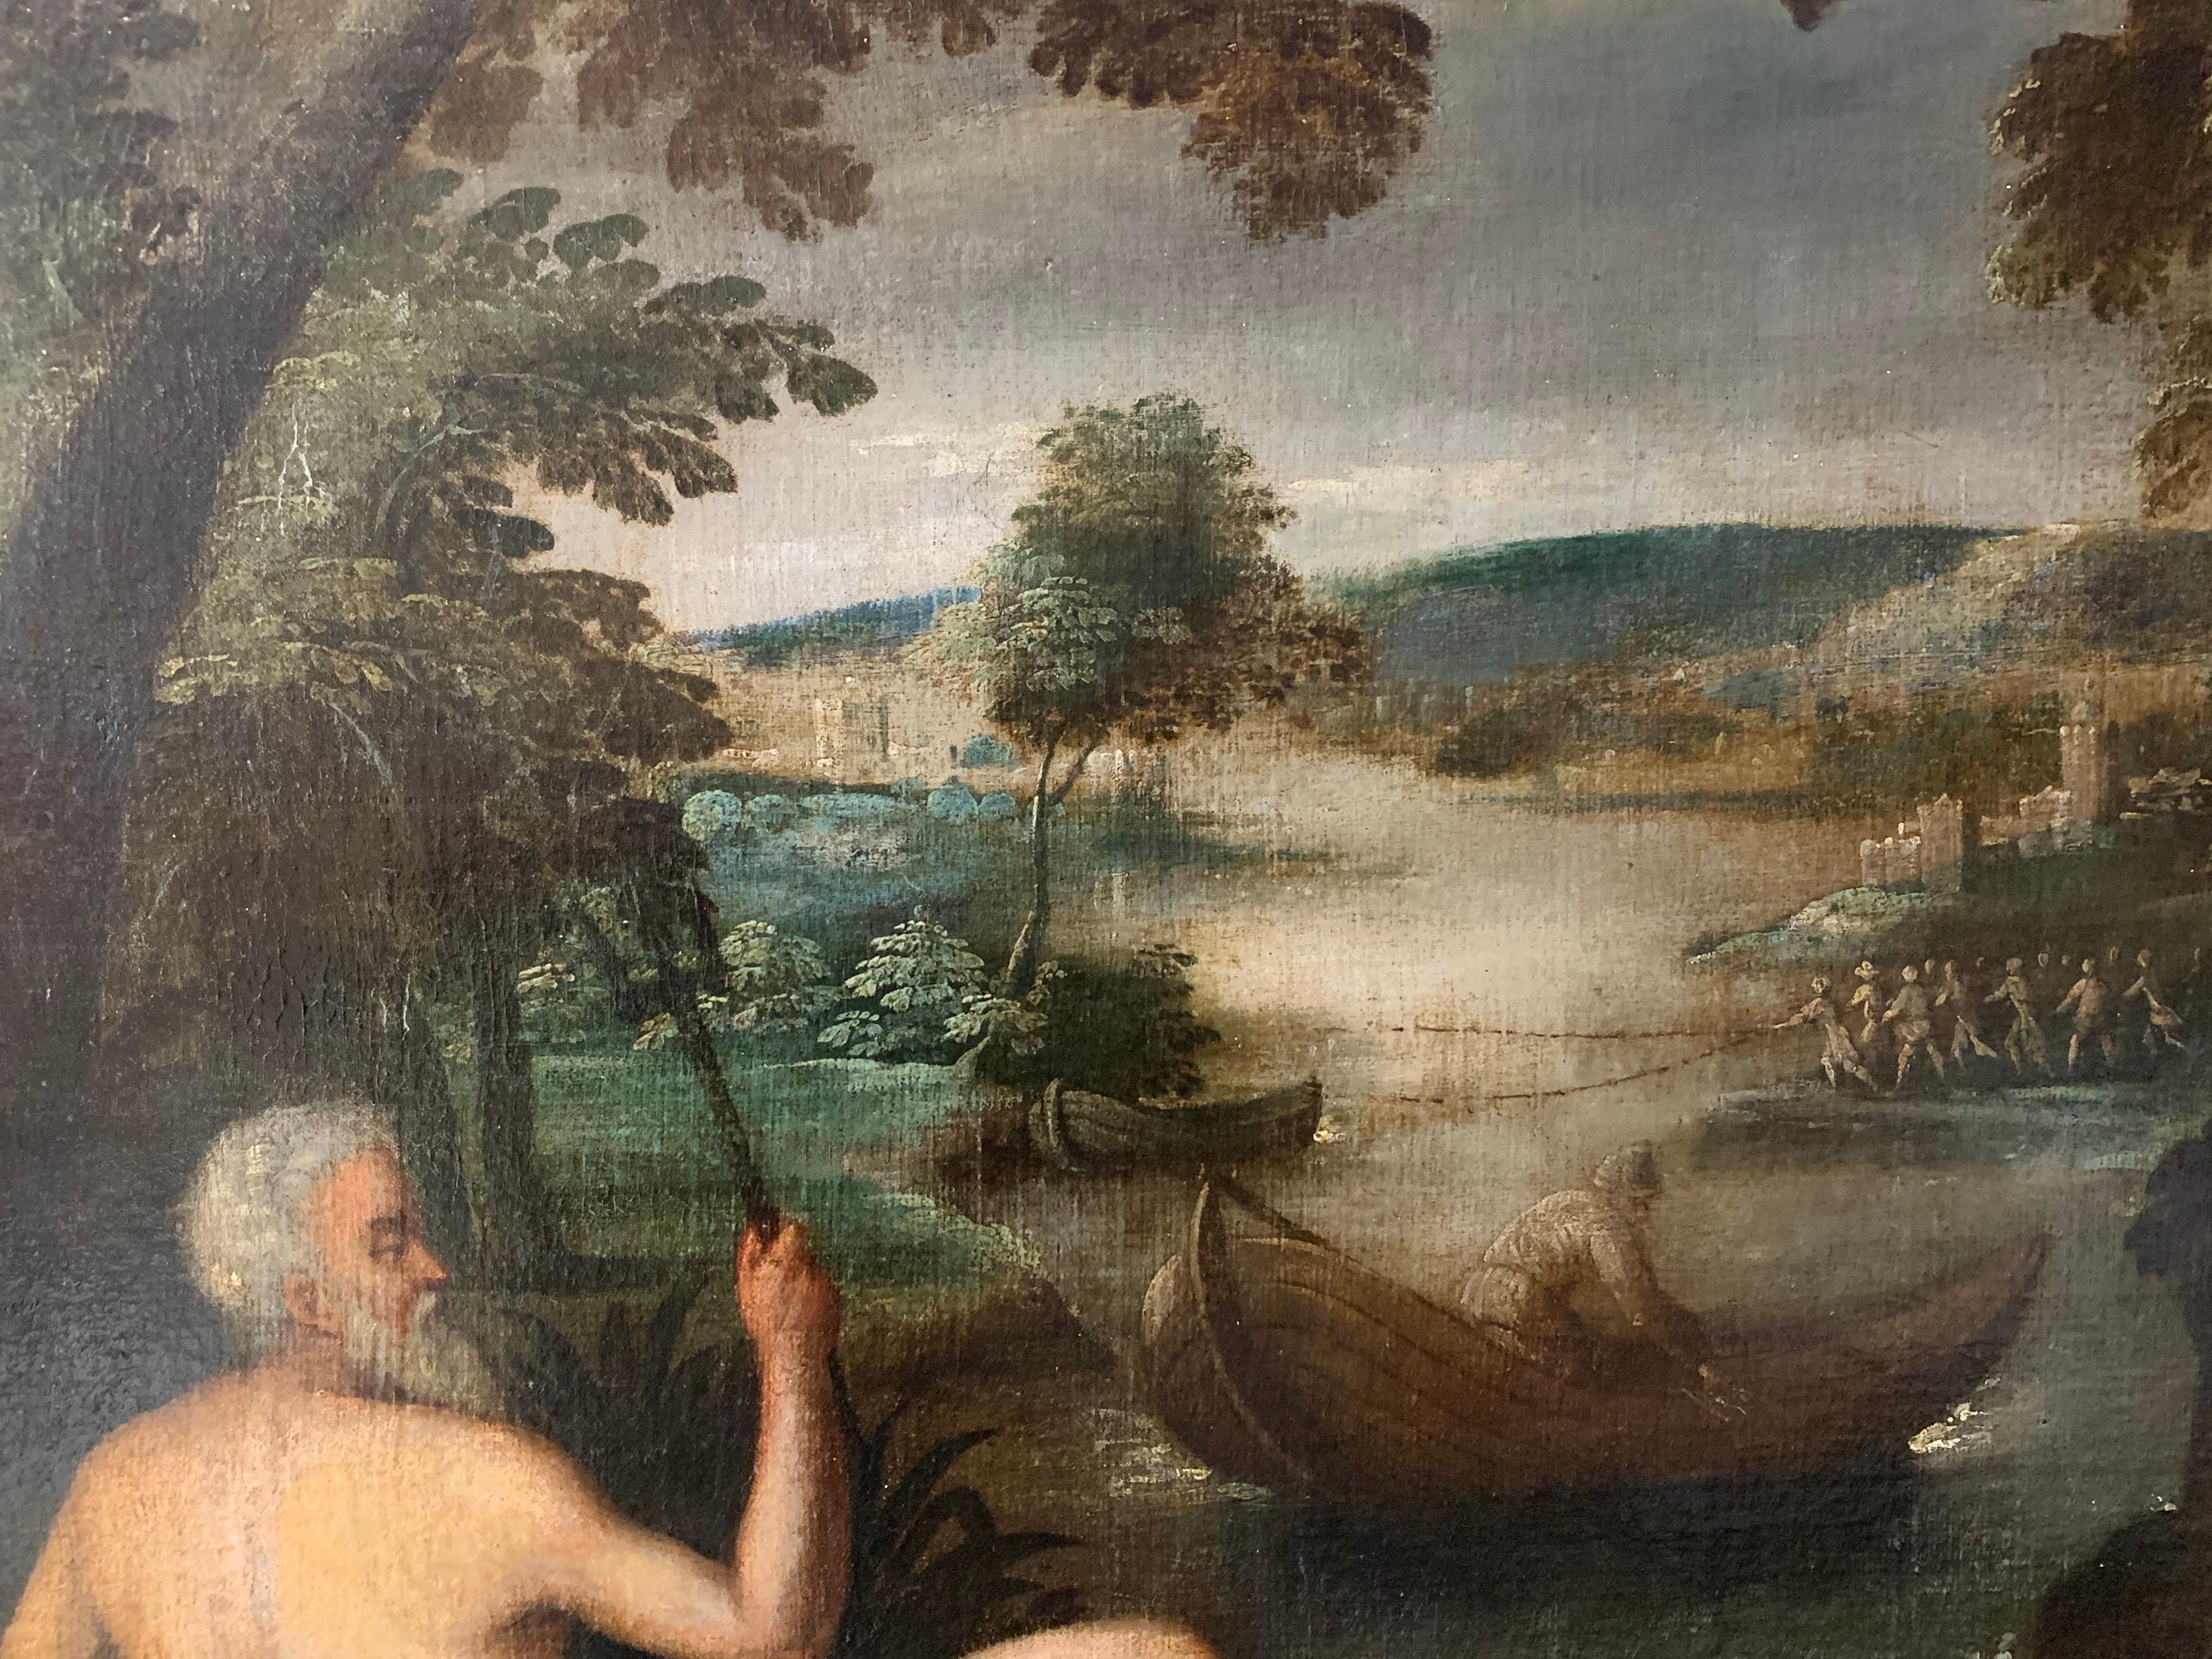 The Miraculous Catch of Fish
Italian School, circa 1600
circle of Pozzoserrato (1550-1605)
oil painting on canvas, framed
framed size: 40 x 53 inches
provenance: private collection, south of France

Very fine quality early Italian Old Master oil